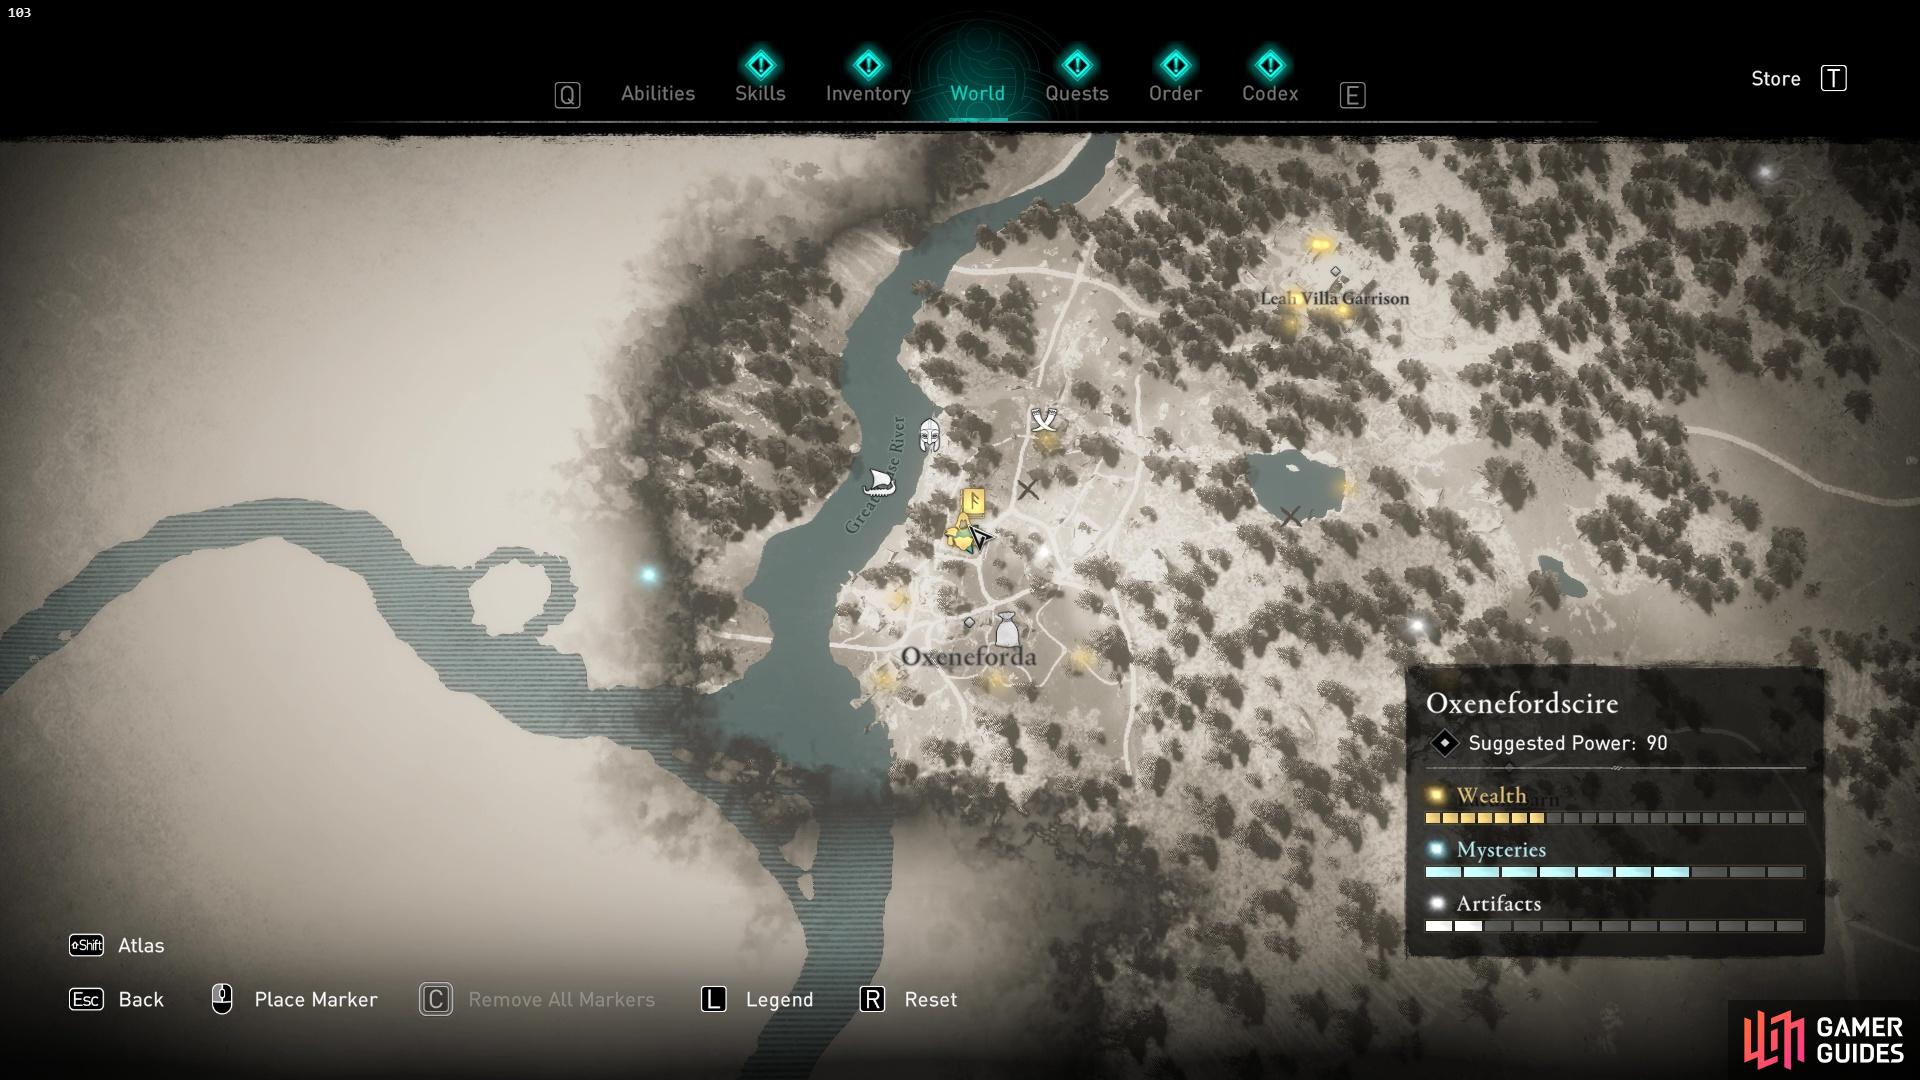 Assassin's Creed Valhalla has one cool new feature — and one big mystery